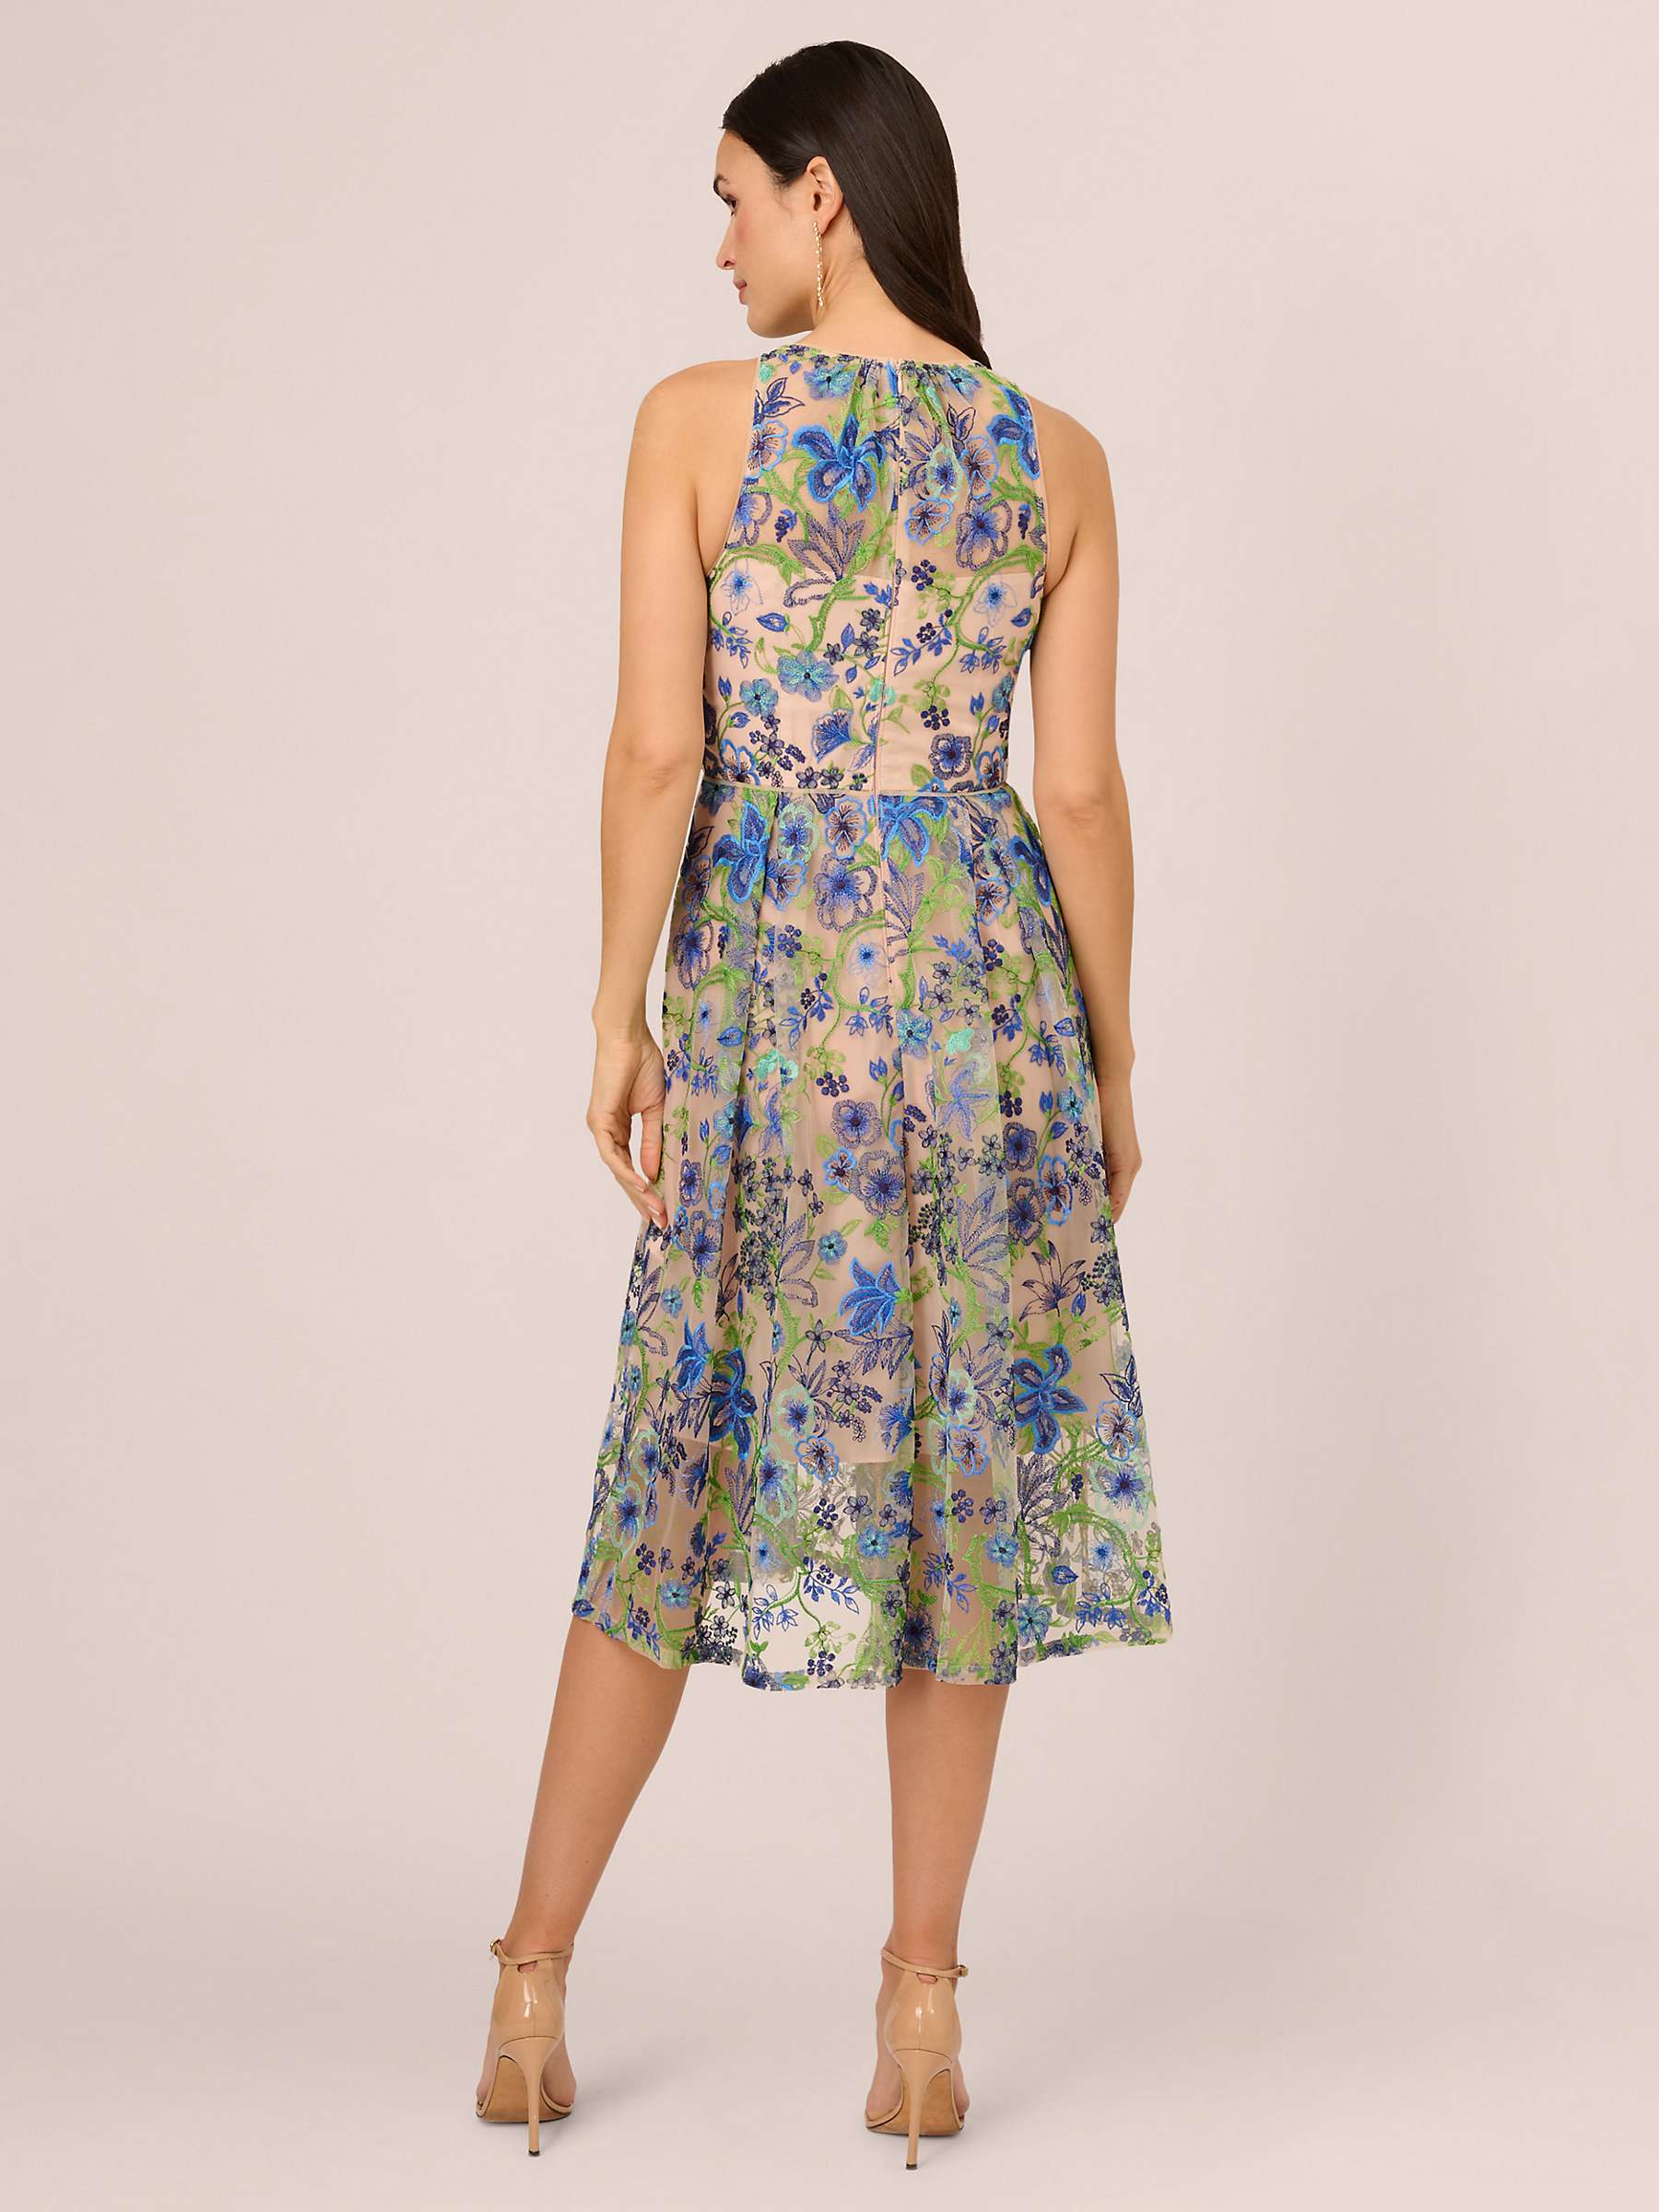 Buy Adrianna Papell Embroidered Fit and Flare Dress, Blue/Multi Online at johnlewis.com